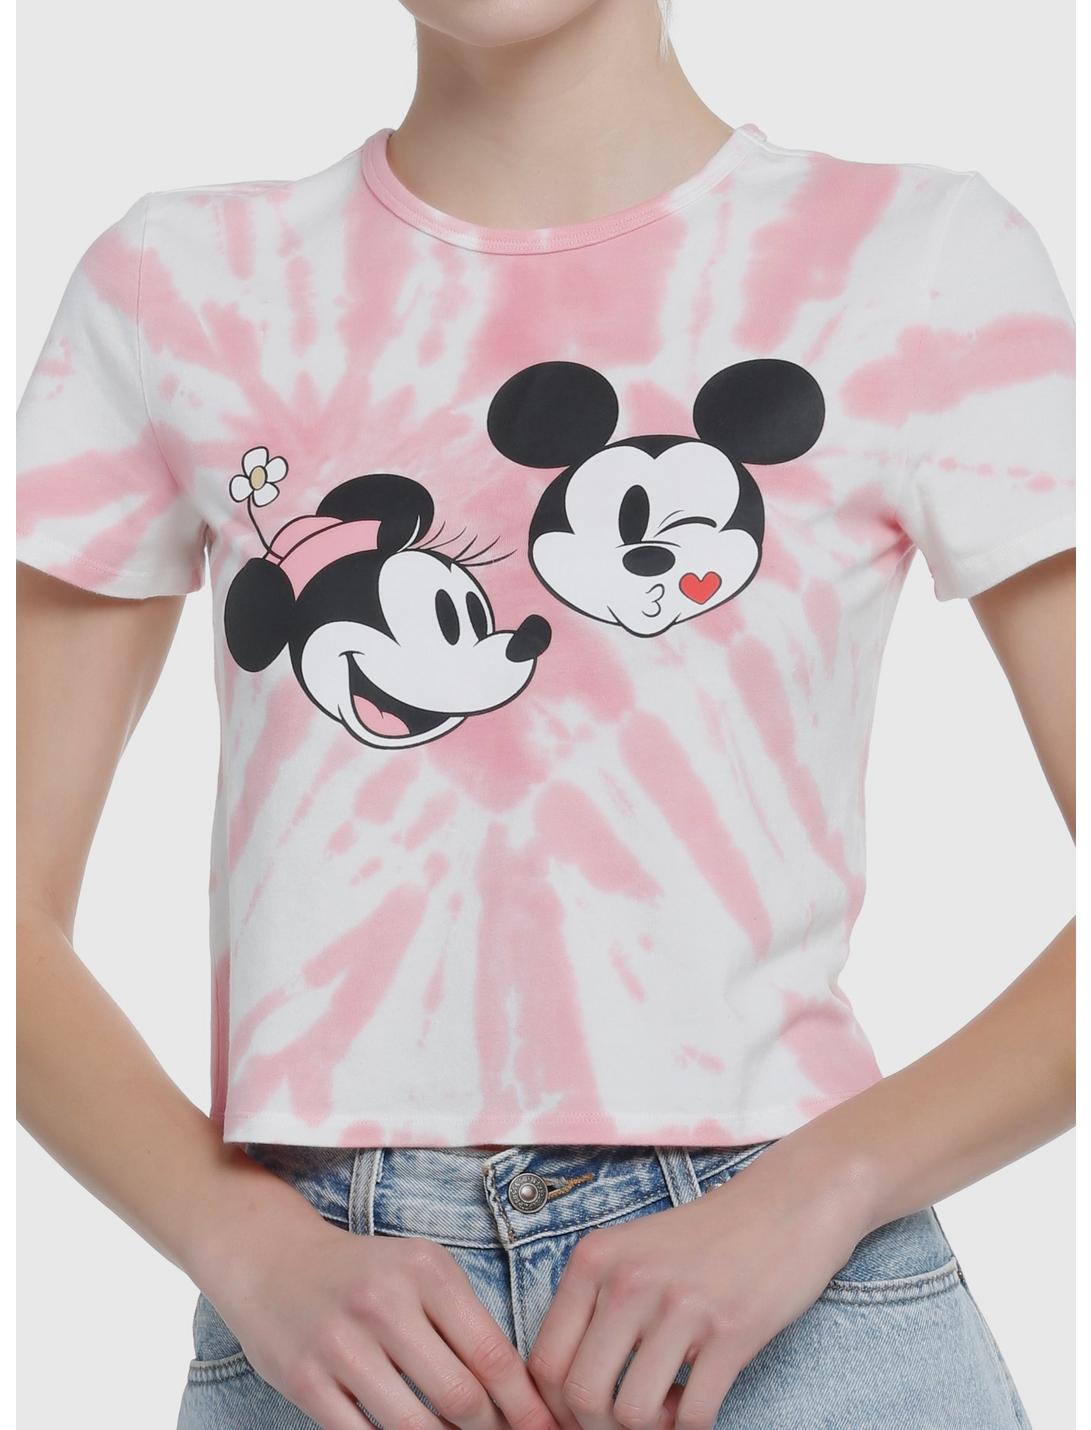 Her Universe Disney Mickey Mouse & Minnie Mouse Kiss Tie-Dye Crop T-Shirt, LIGHT PINK, hi-res